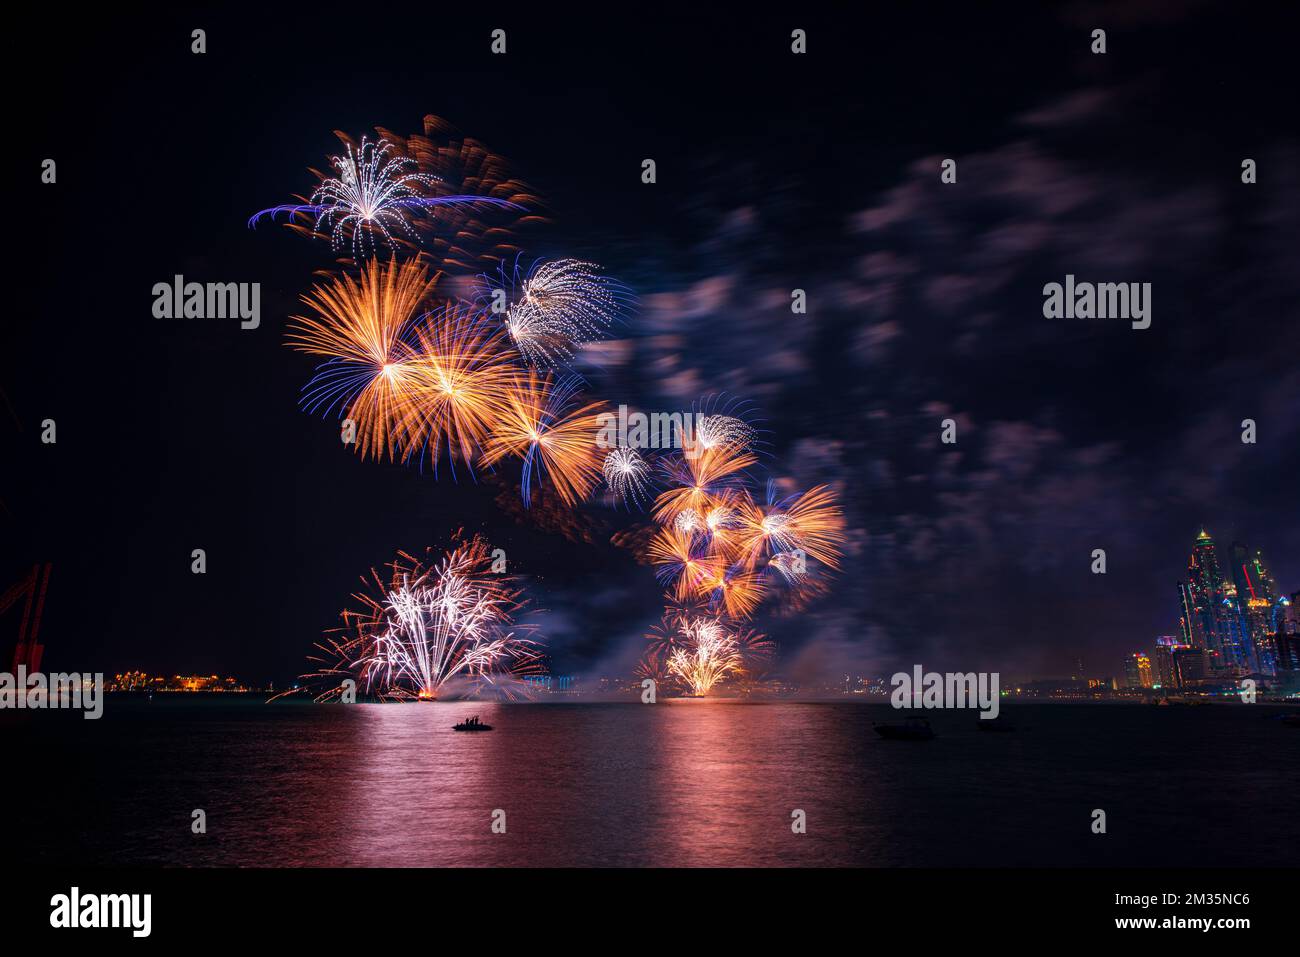 A beautiful shot of fireworks glowing in the night sky on UAE's National Day Stock Photo